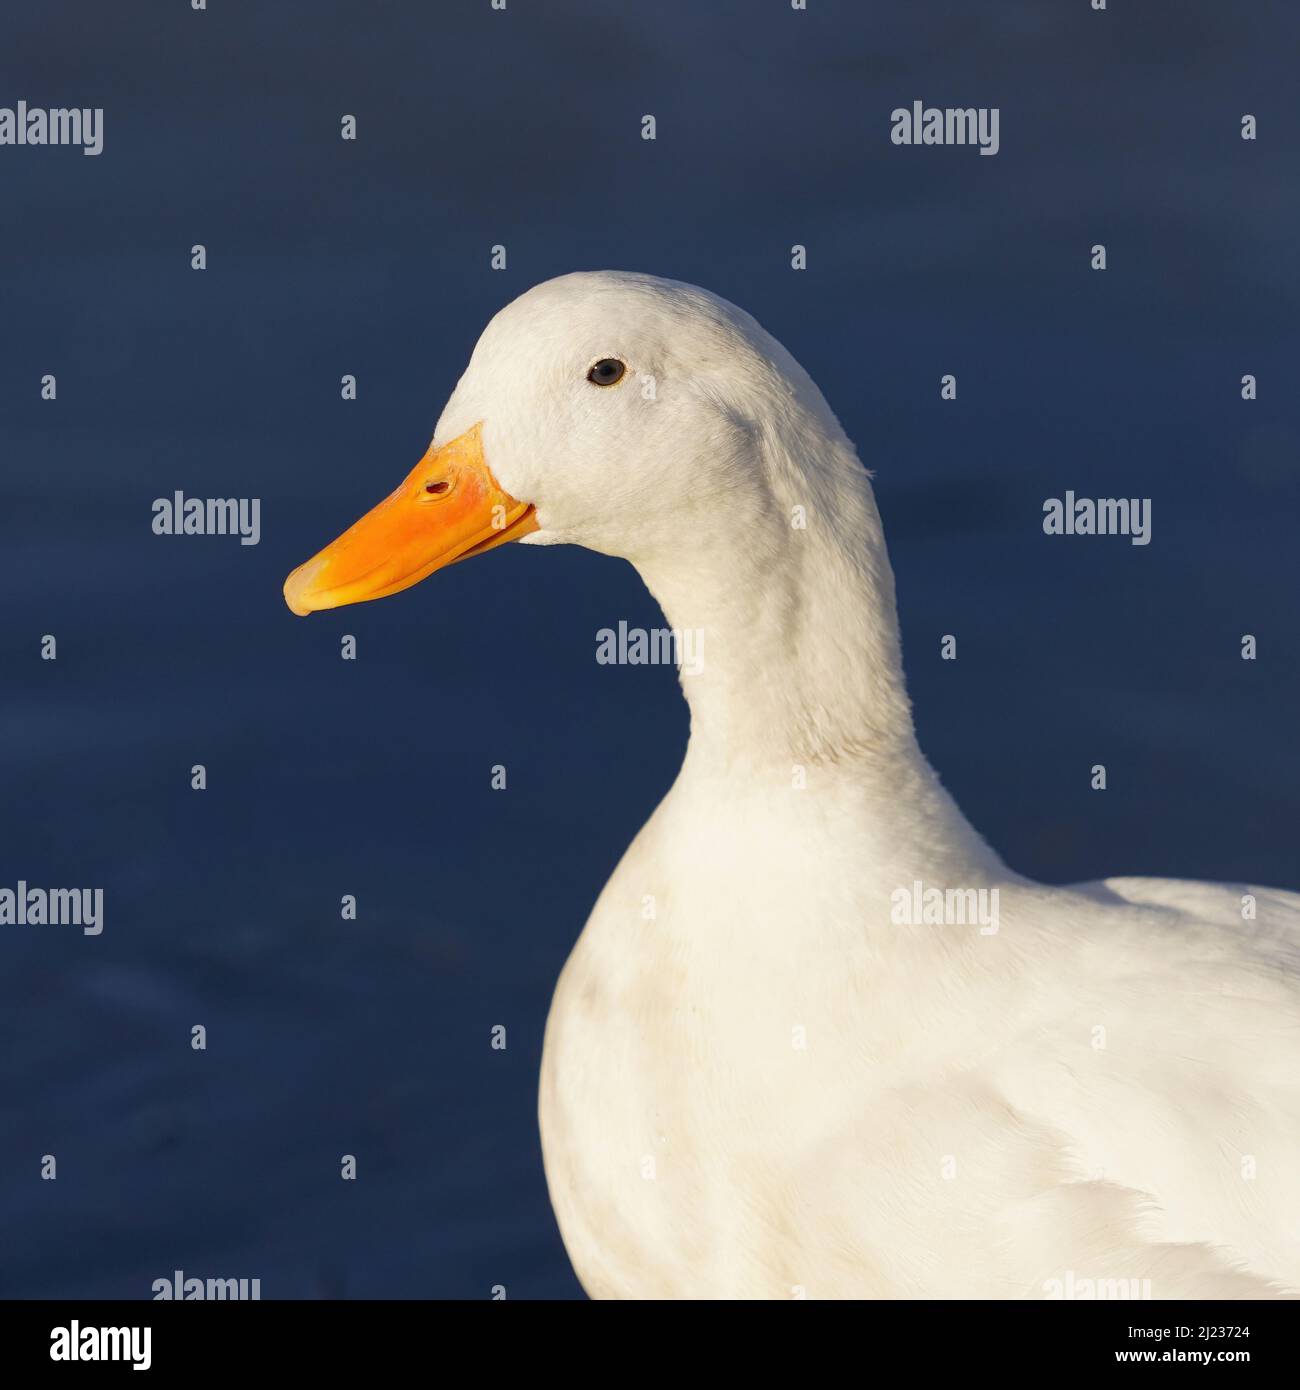 Close up portrait of a Pekin Duck or White Pekin with a deep blue background. Stock Photo